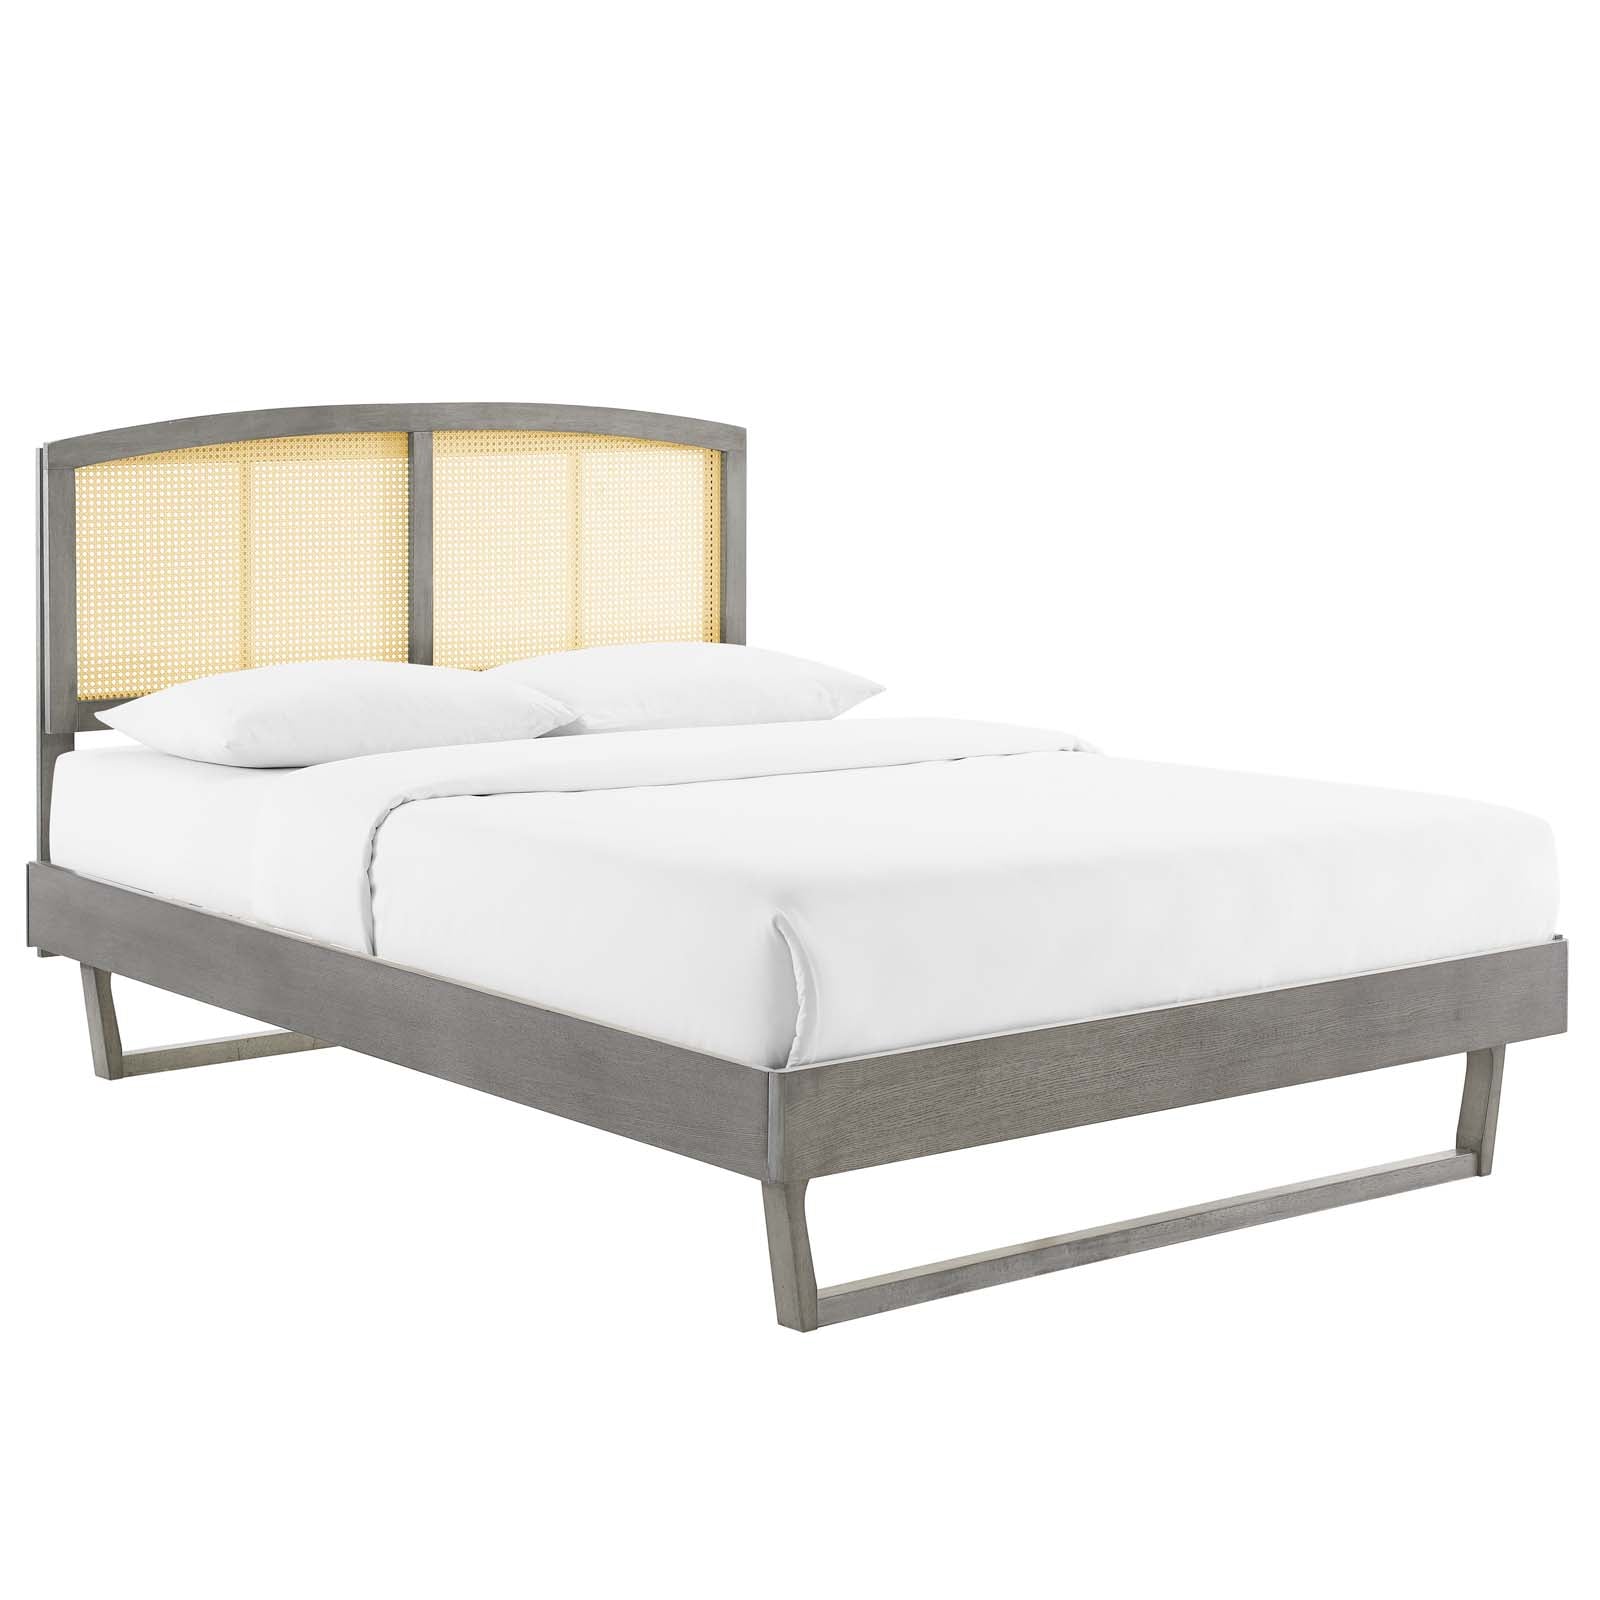 Modway Beds - Sierra-Cane-and-Wood-Queen-Platform-Bed-With-Angular-Legs-Gray